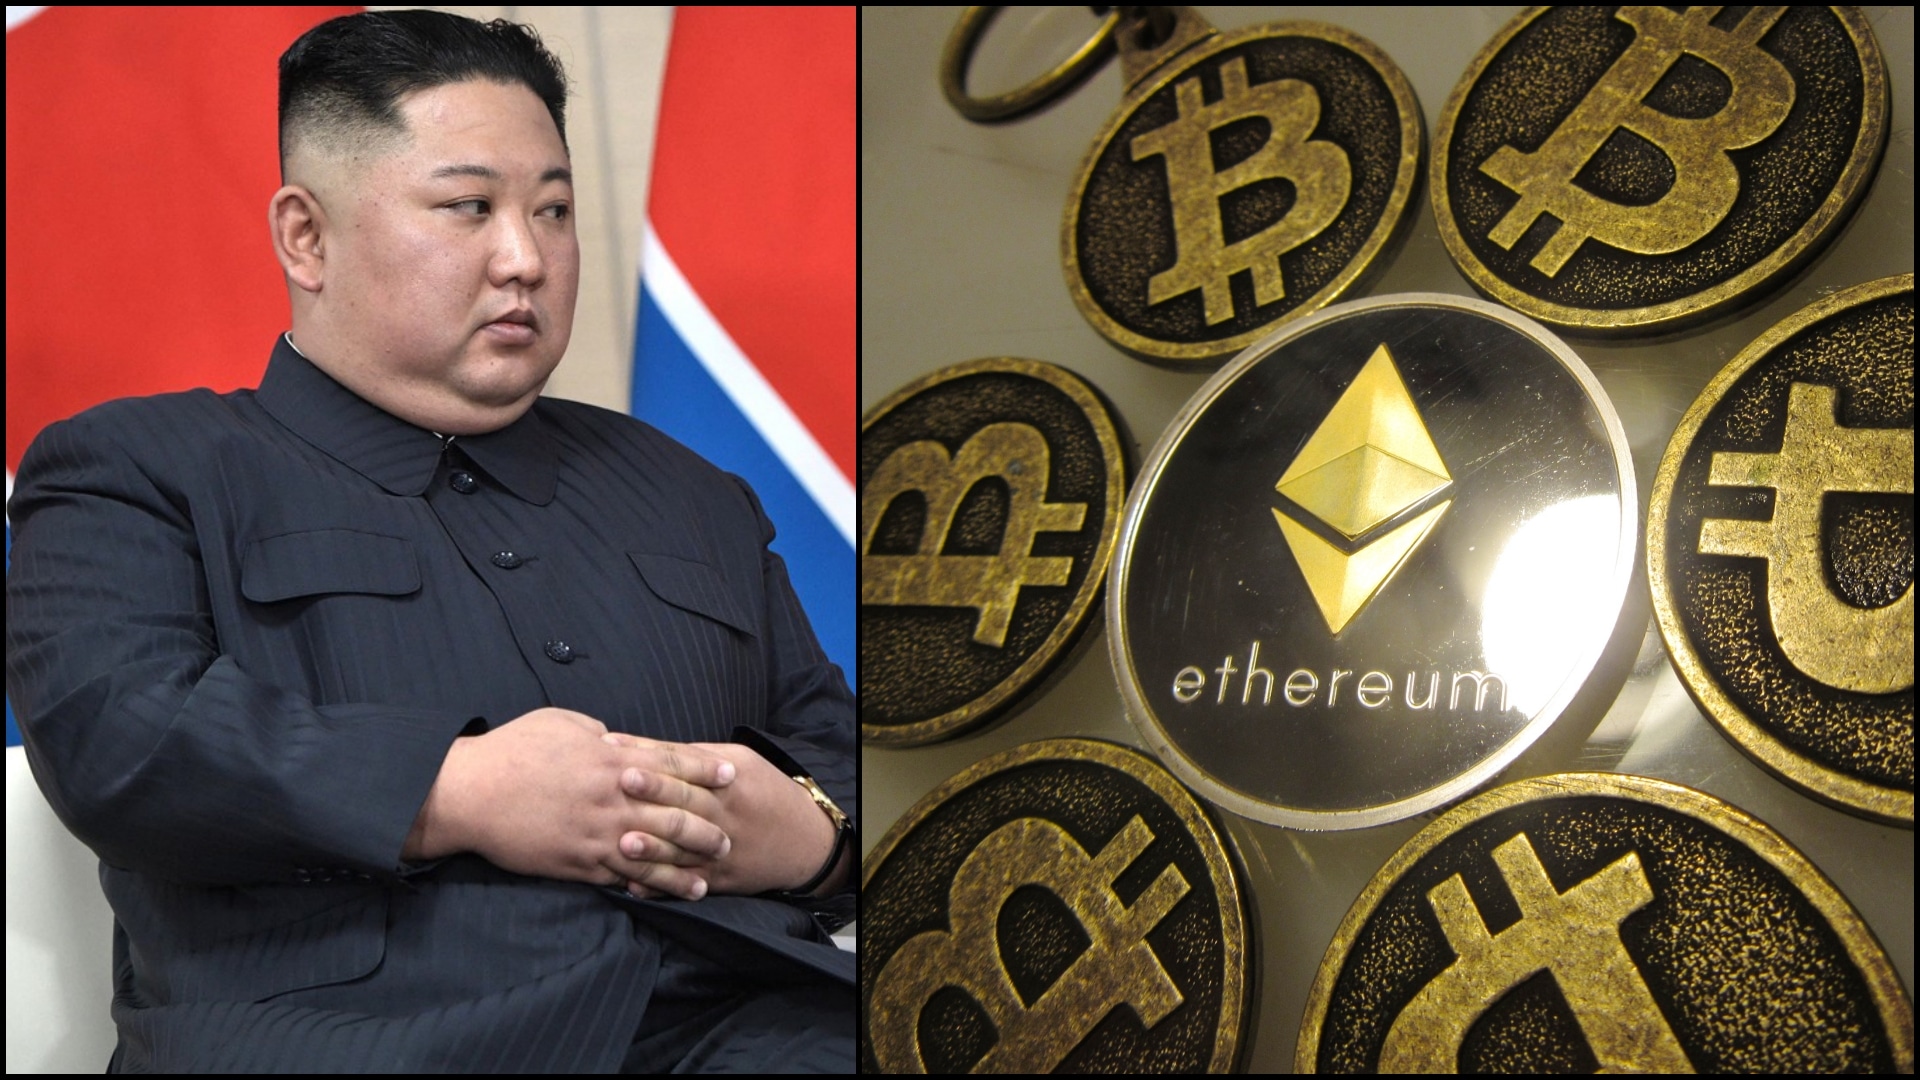 More than 500 million are gone.  Kim and the DPRK are the second largest crypto-theft in history